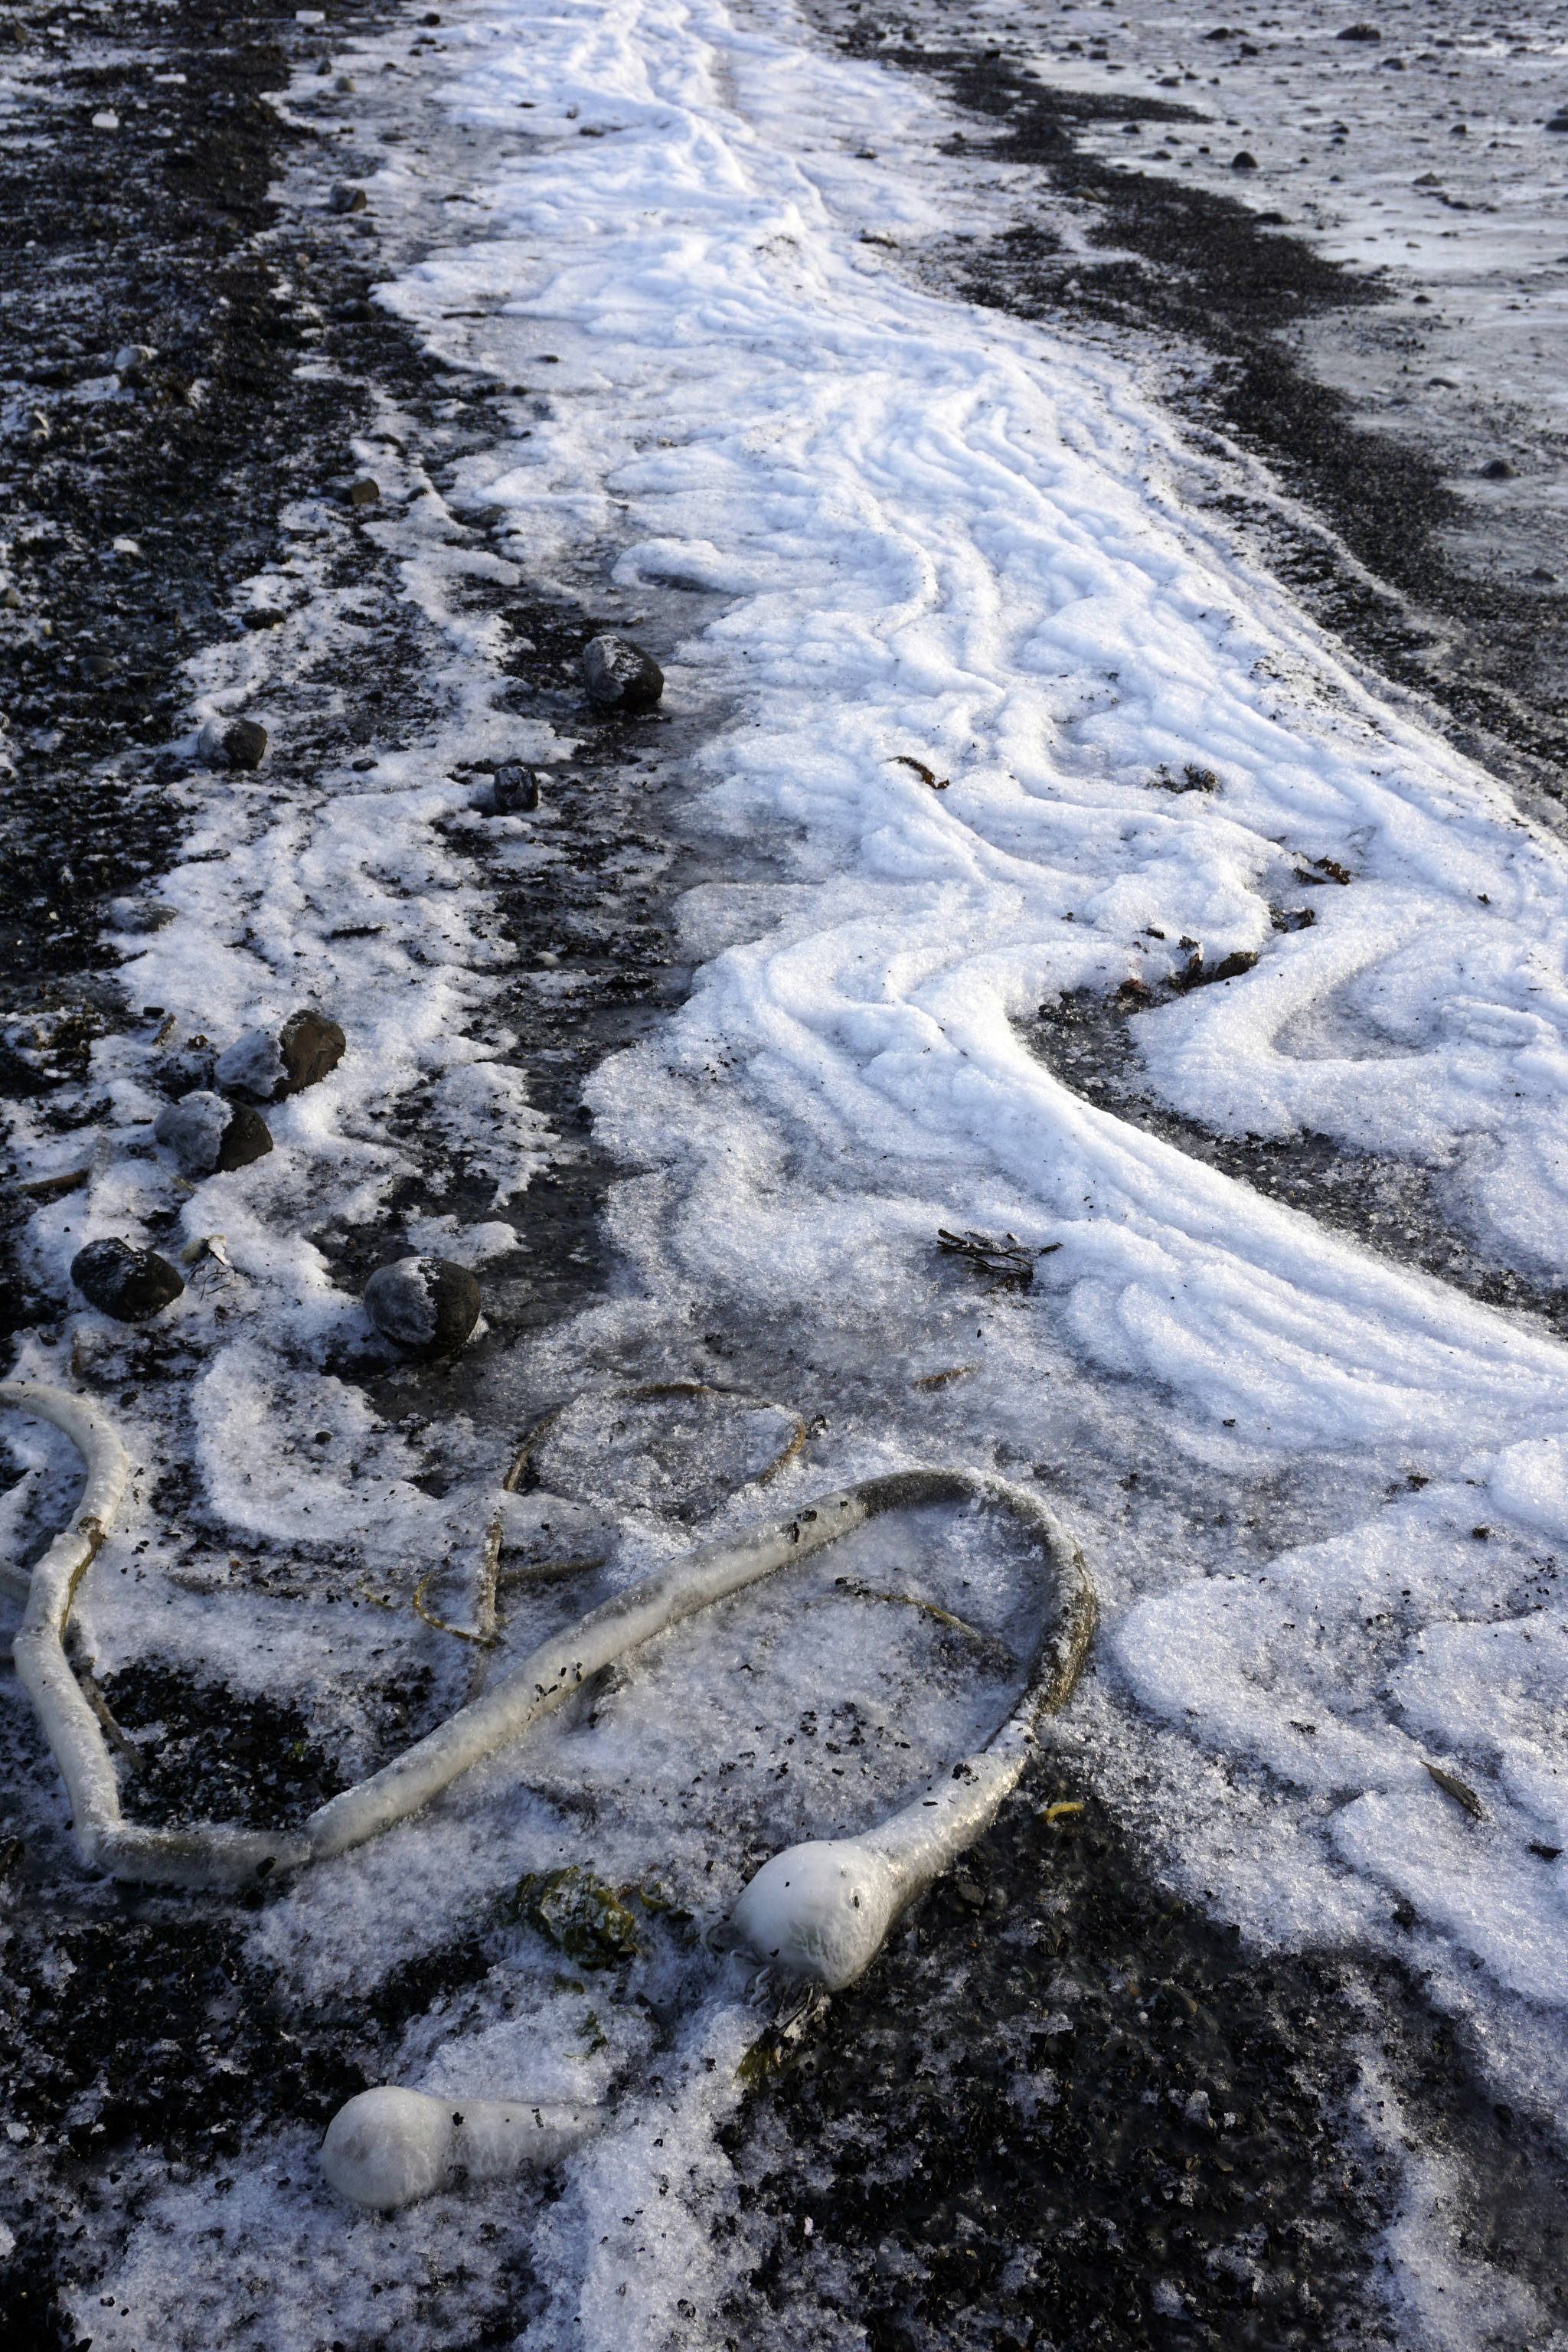 Ice forms at the tide line on the beach near Mariner Park on Tuesday, Jan. 8, 2019, in Homer, Alaska. (Photo by Michael Armstrong/Homer News)                                Ice forms at the tide line on the beach near Mariner Park on Tuesday, Jan. 8, 2019, in Homer, Alaska. (Photo by Michael Armstrong/Homer News)